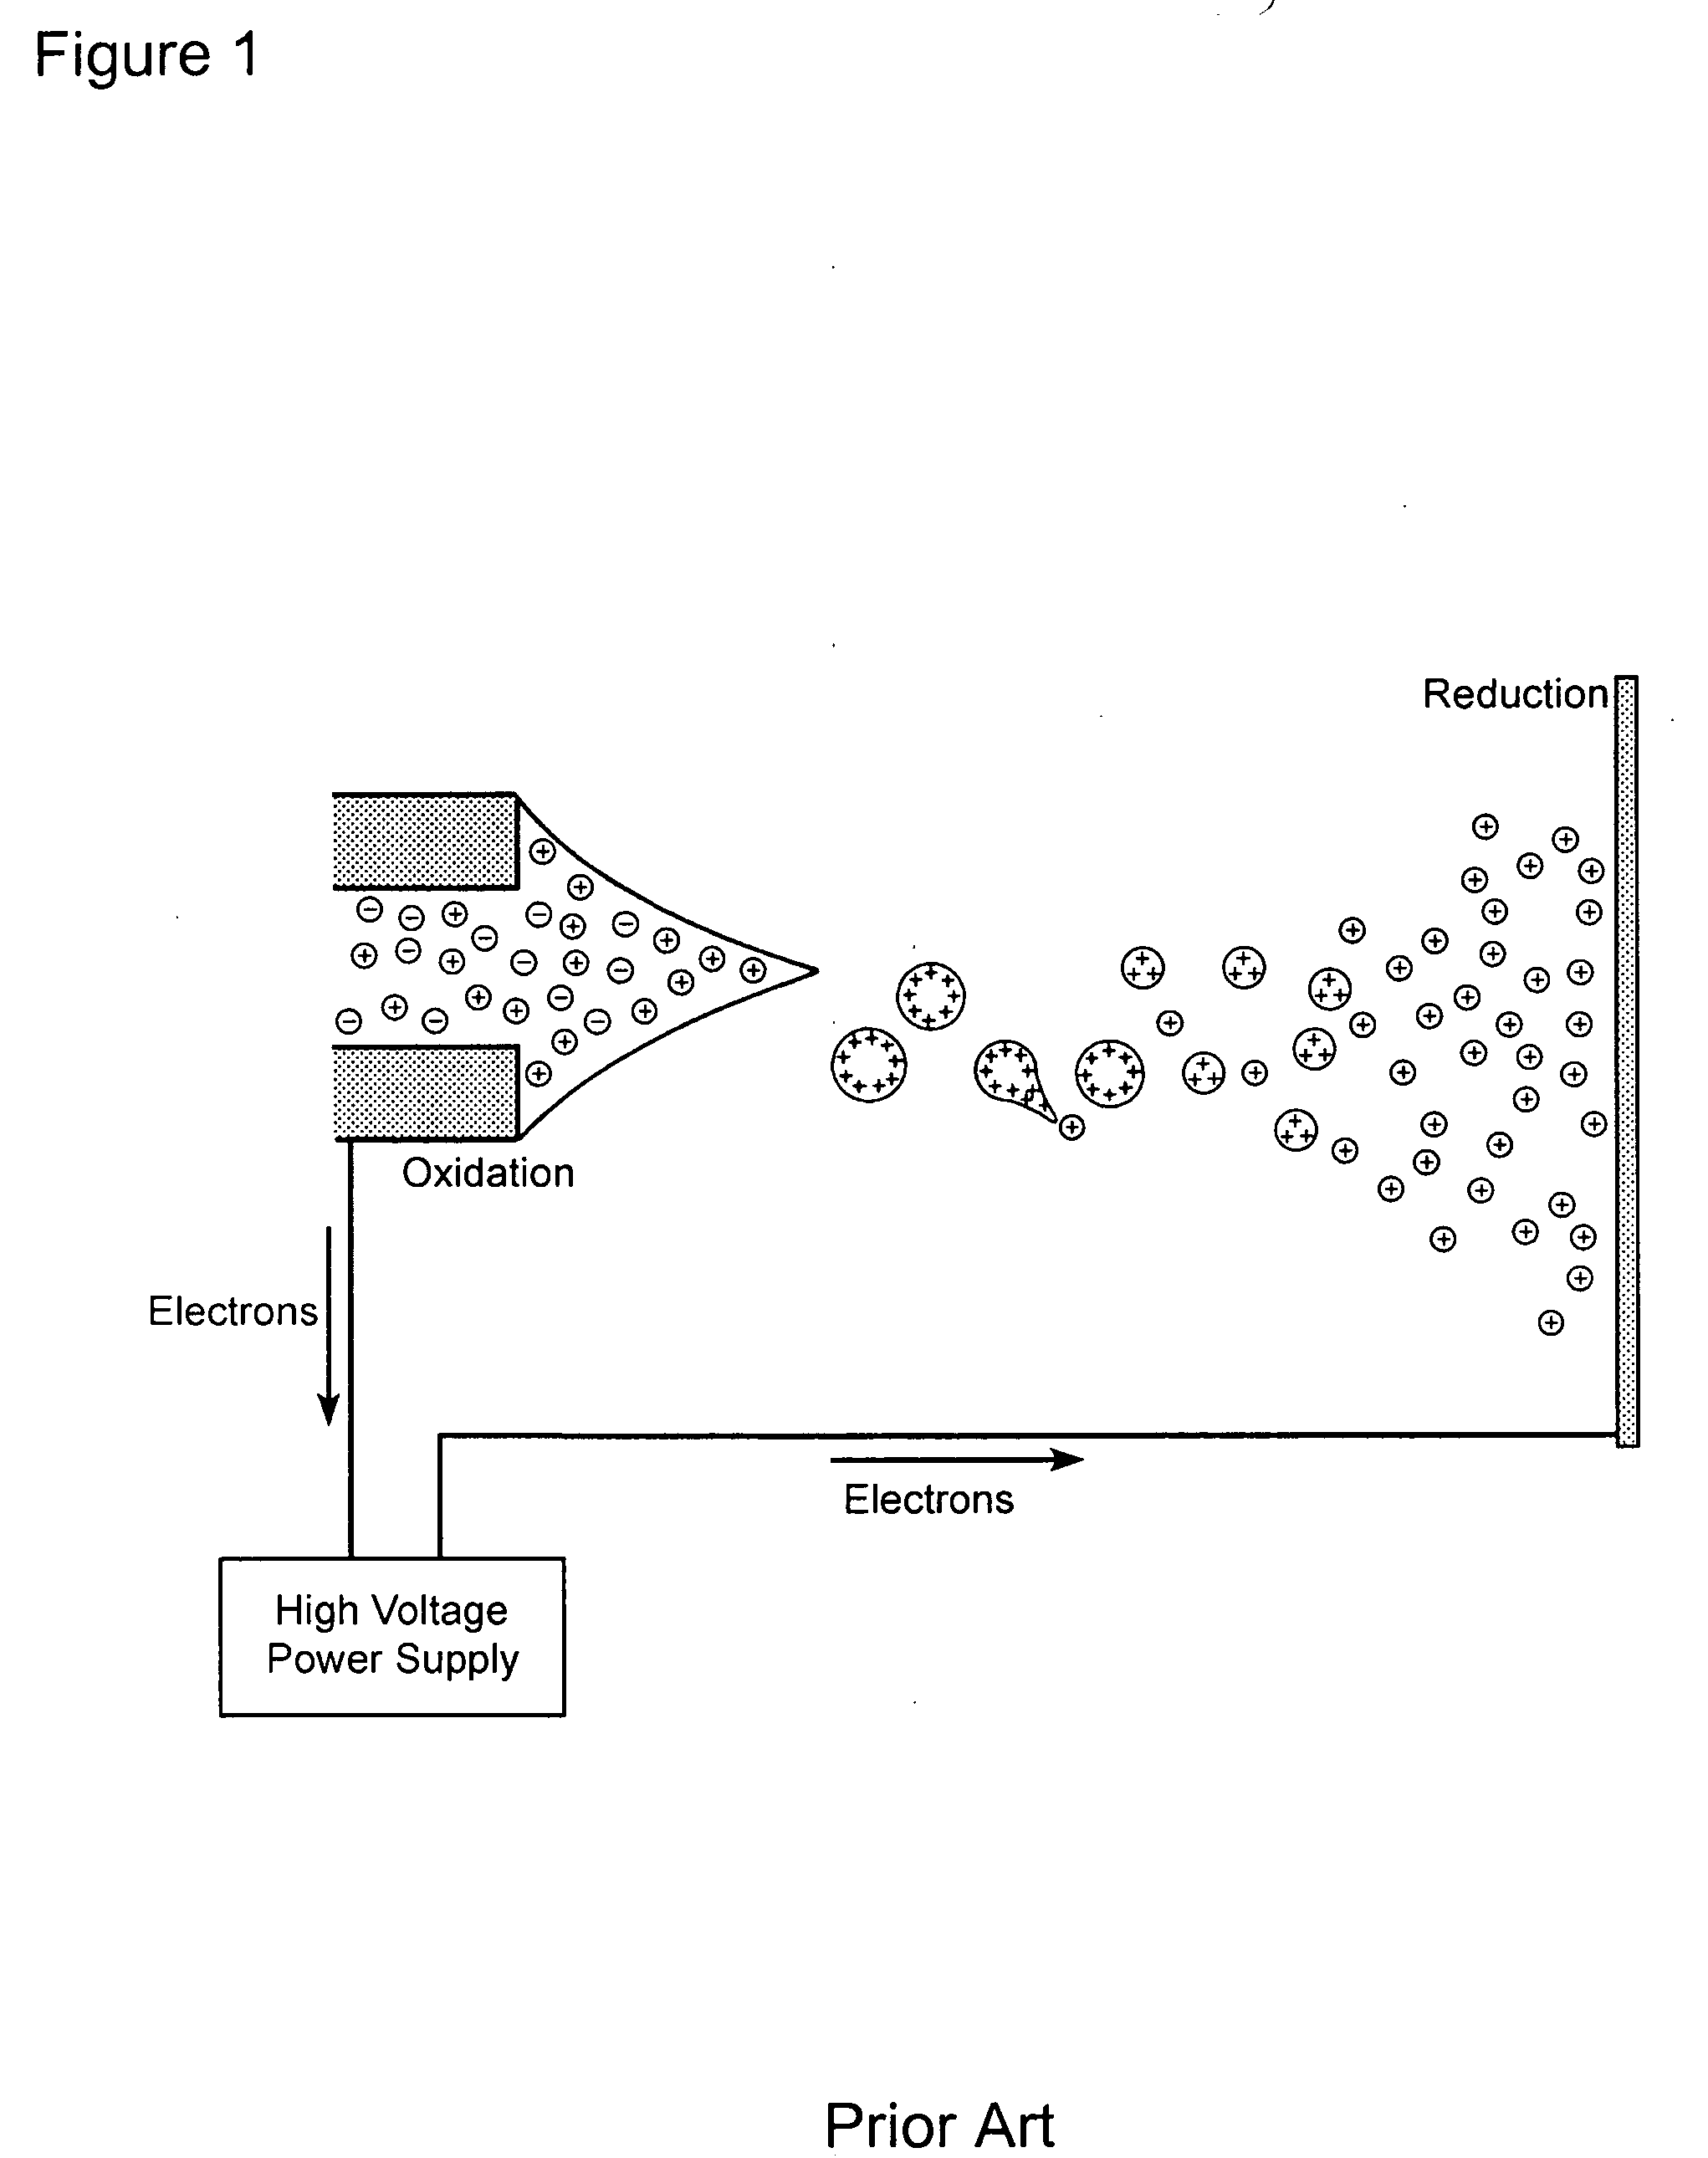 Chemical probe using field-induced droplet ionization mass spectrometry